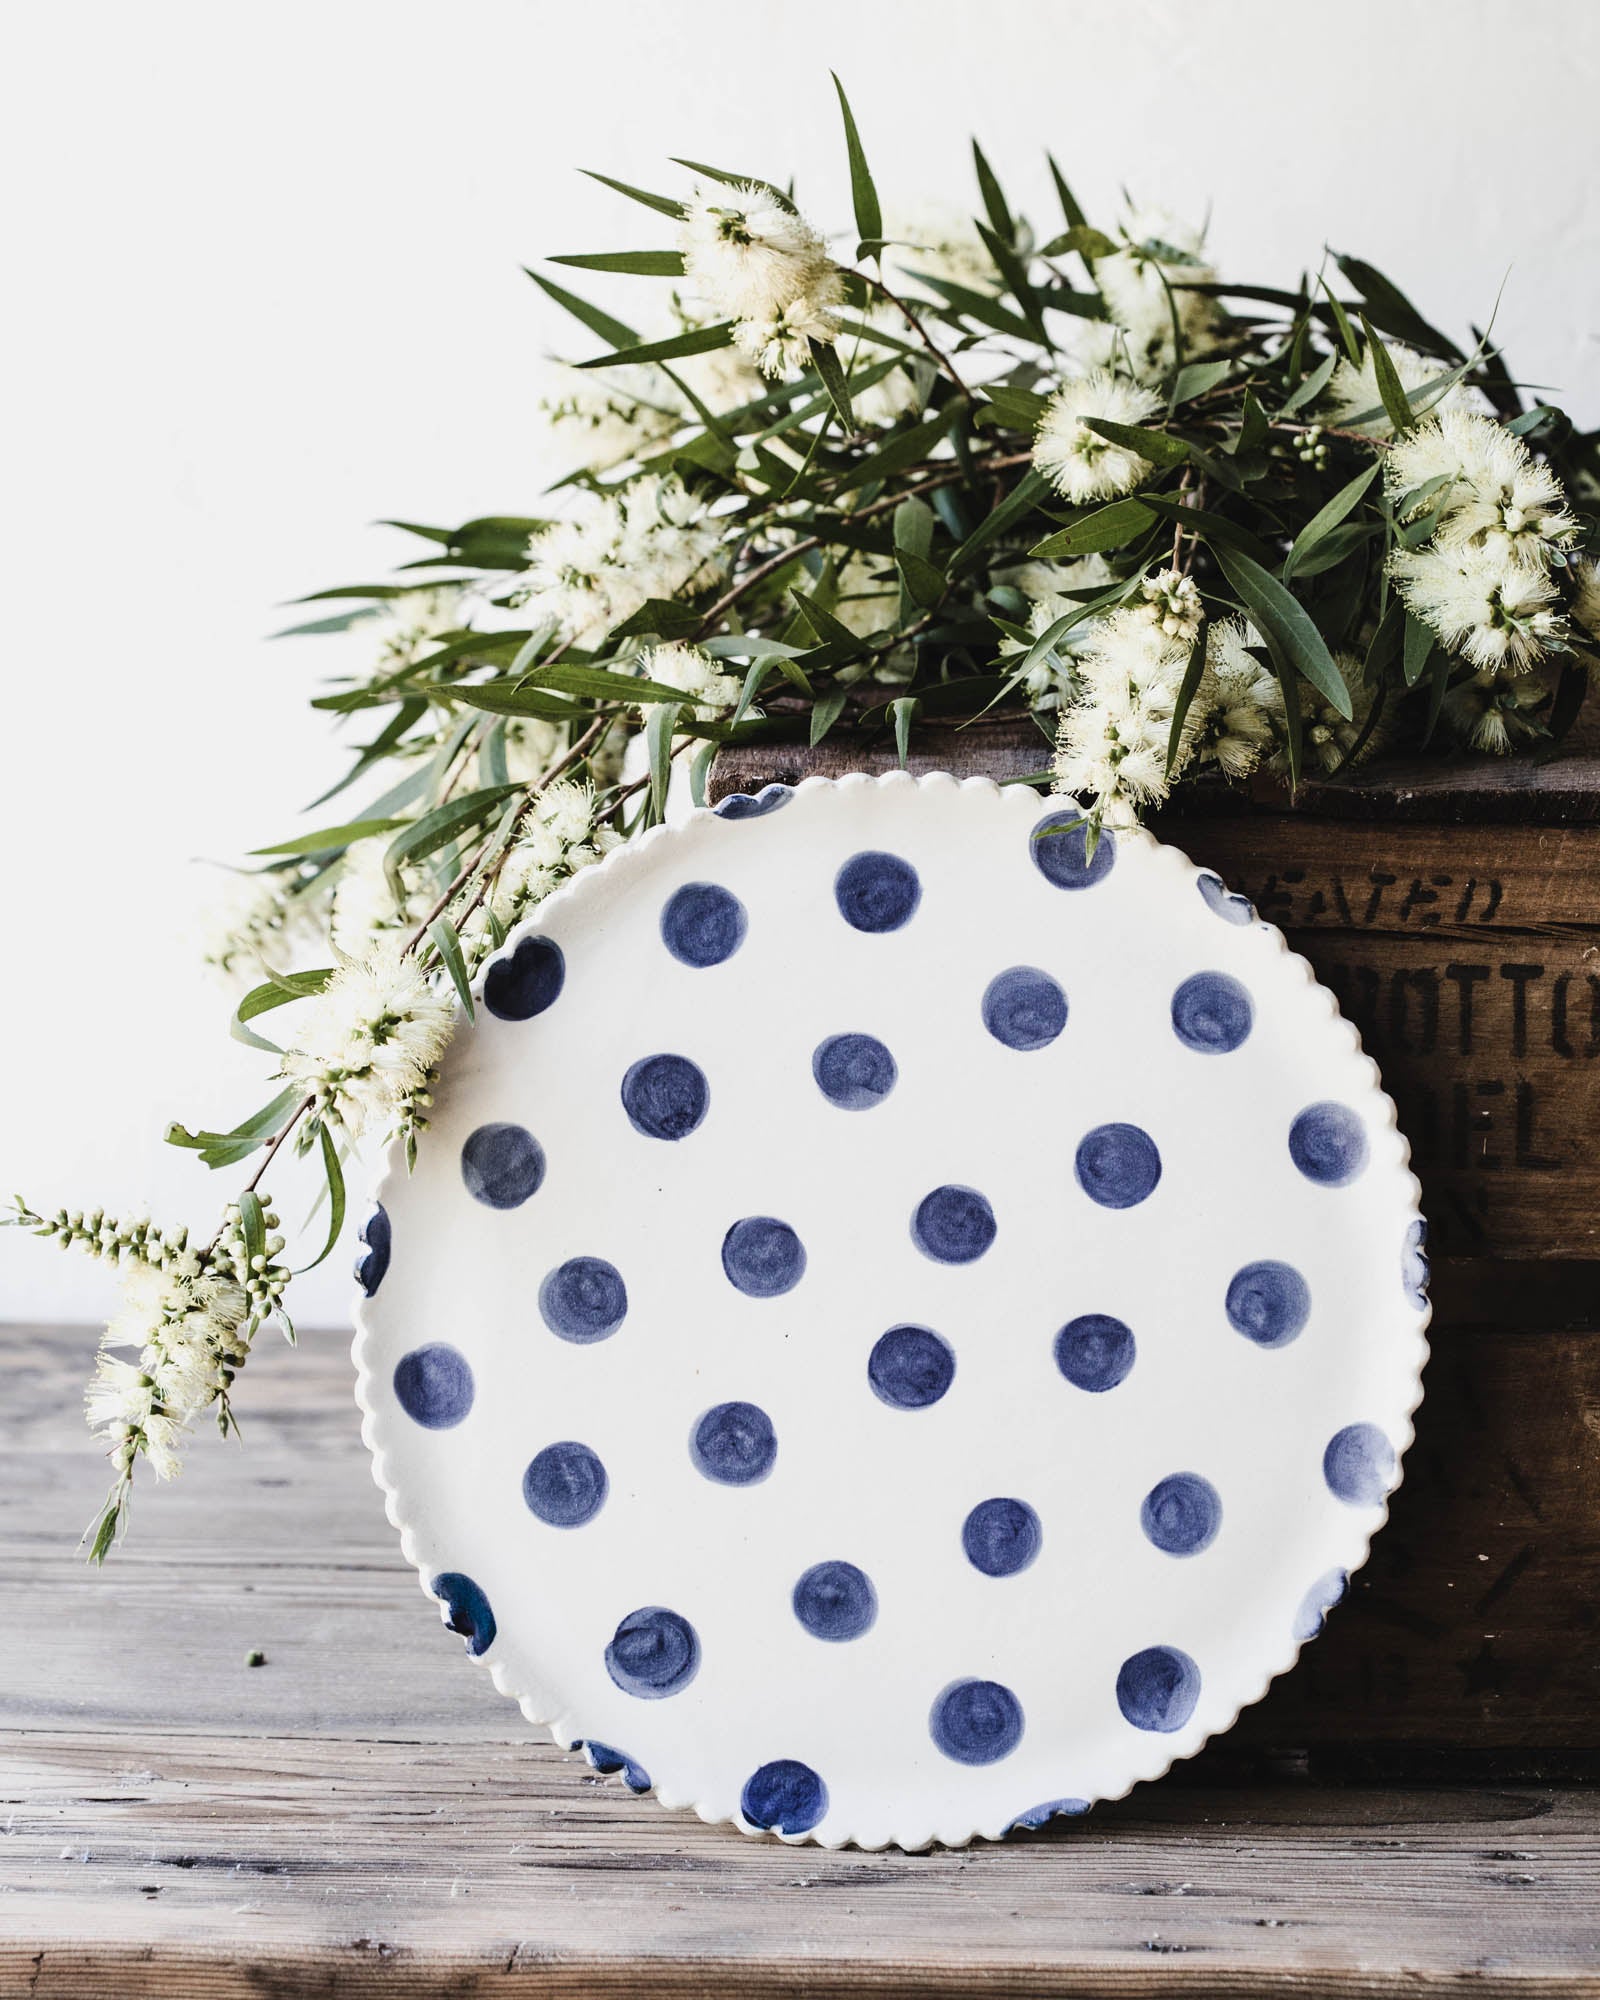 Large scallop rim plate with large navy blue polka dots by clay beehive